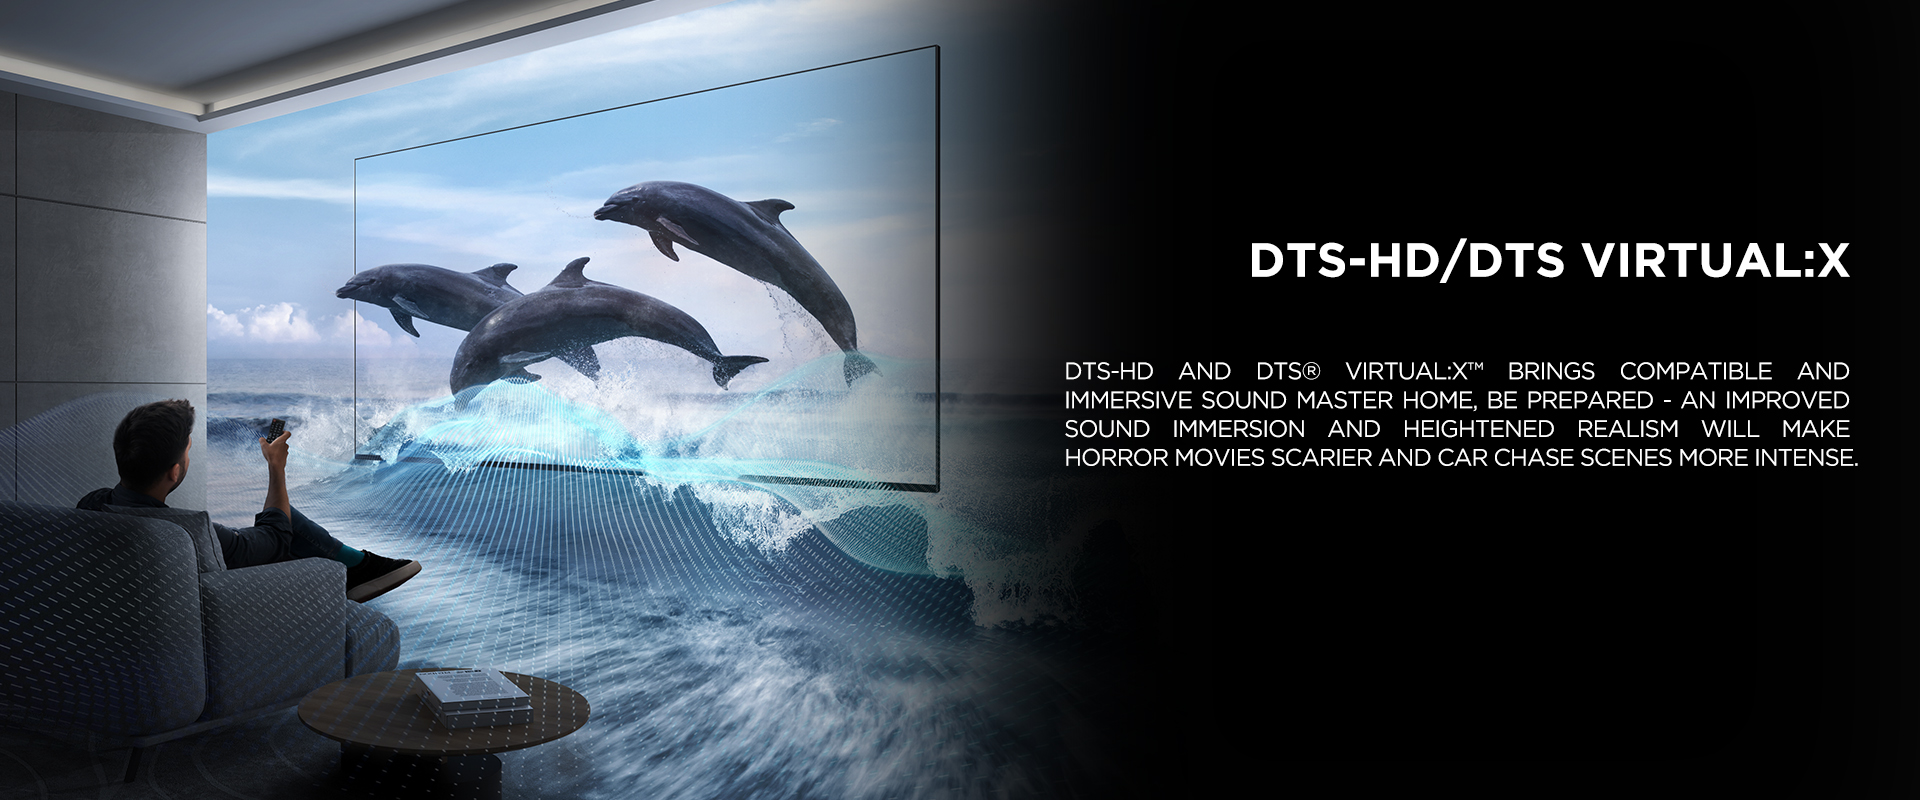 DTS-HD/DTS Virtual:X - DTS-HD and DTS?? VIRTUAL:X???�÷?Çæ brings compatible and immersive sound master home, be prepared - an improved sound immersion and heightened realism will make horror movies scarier and car chase scenes more intense.